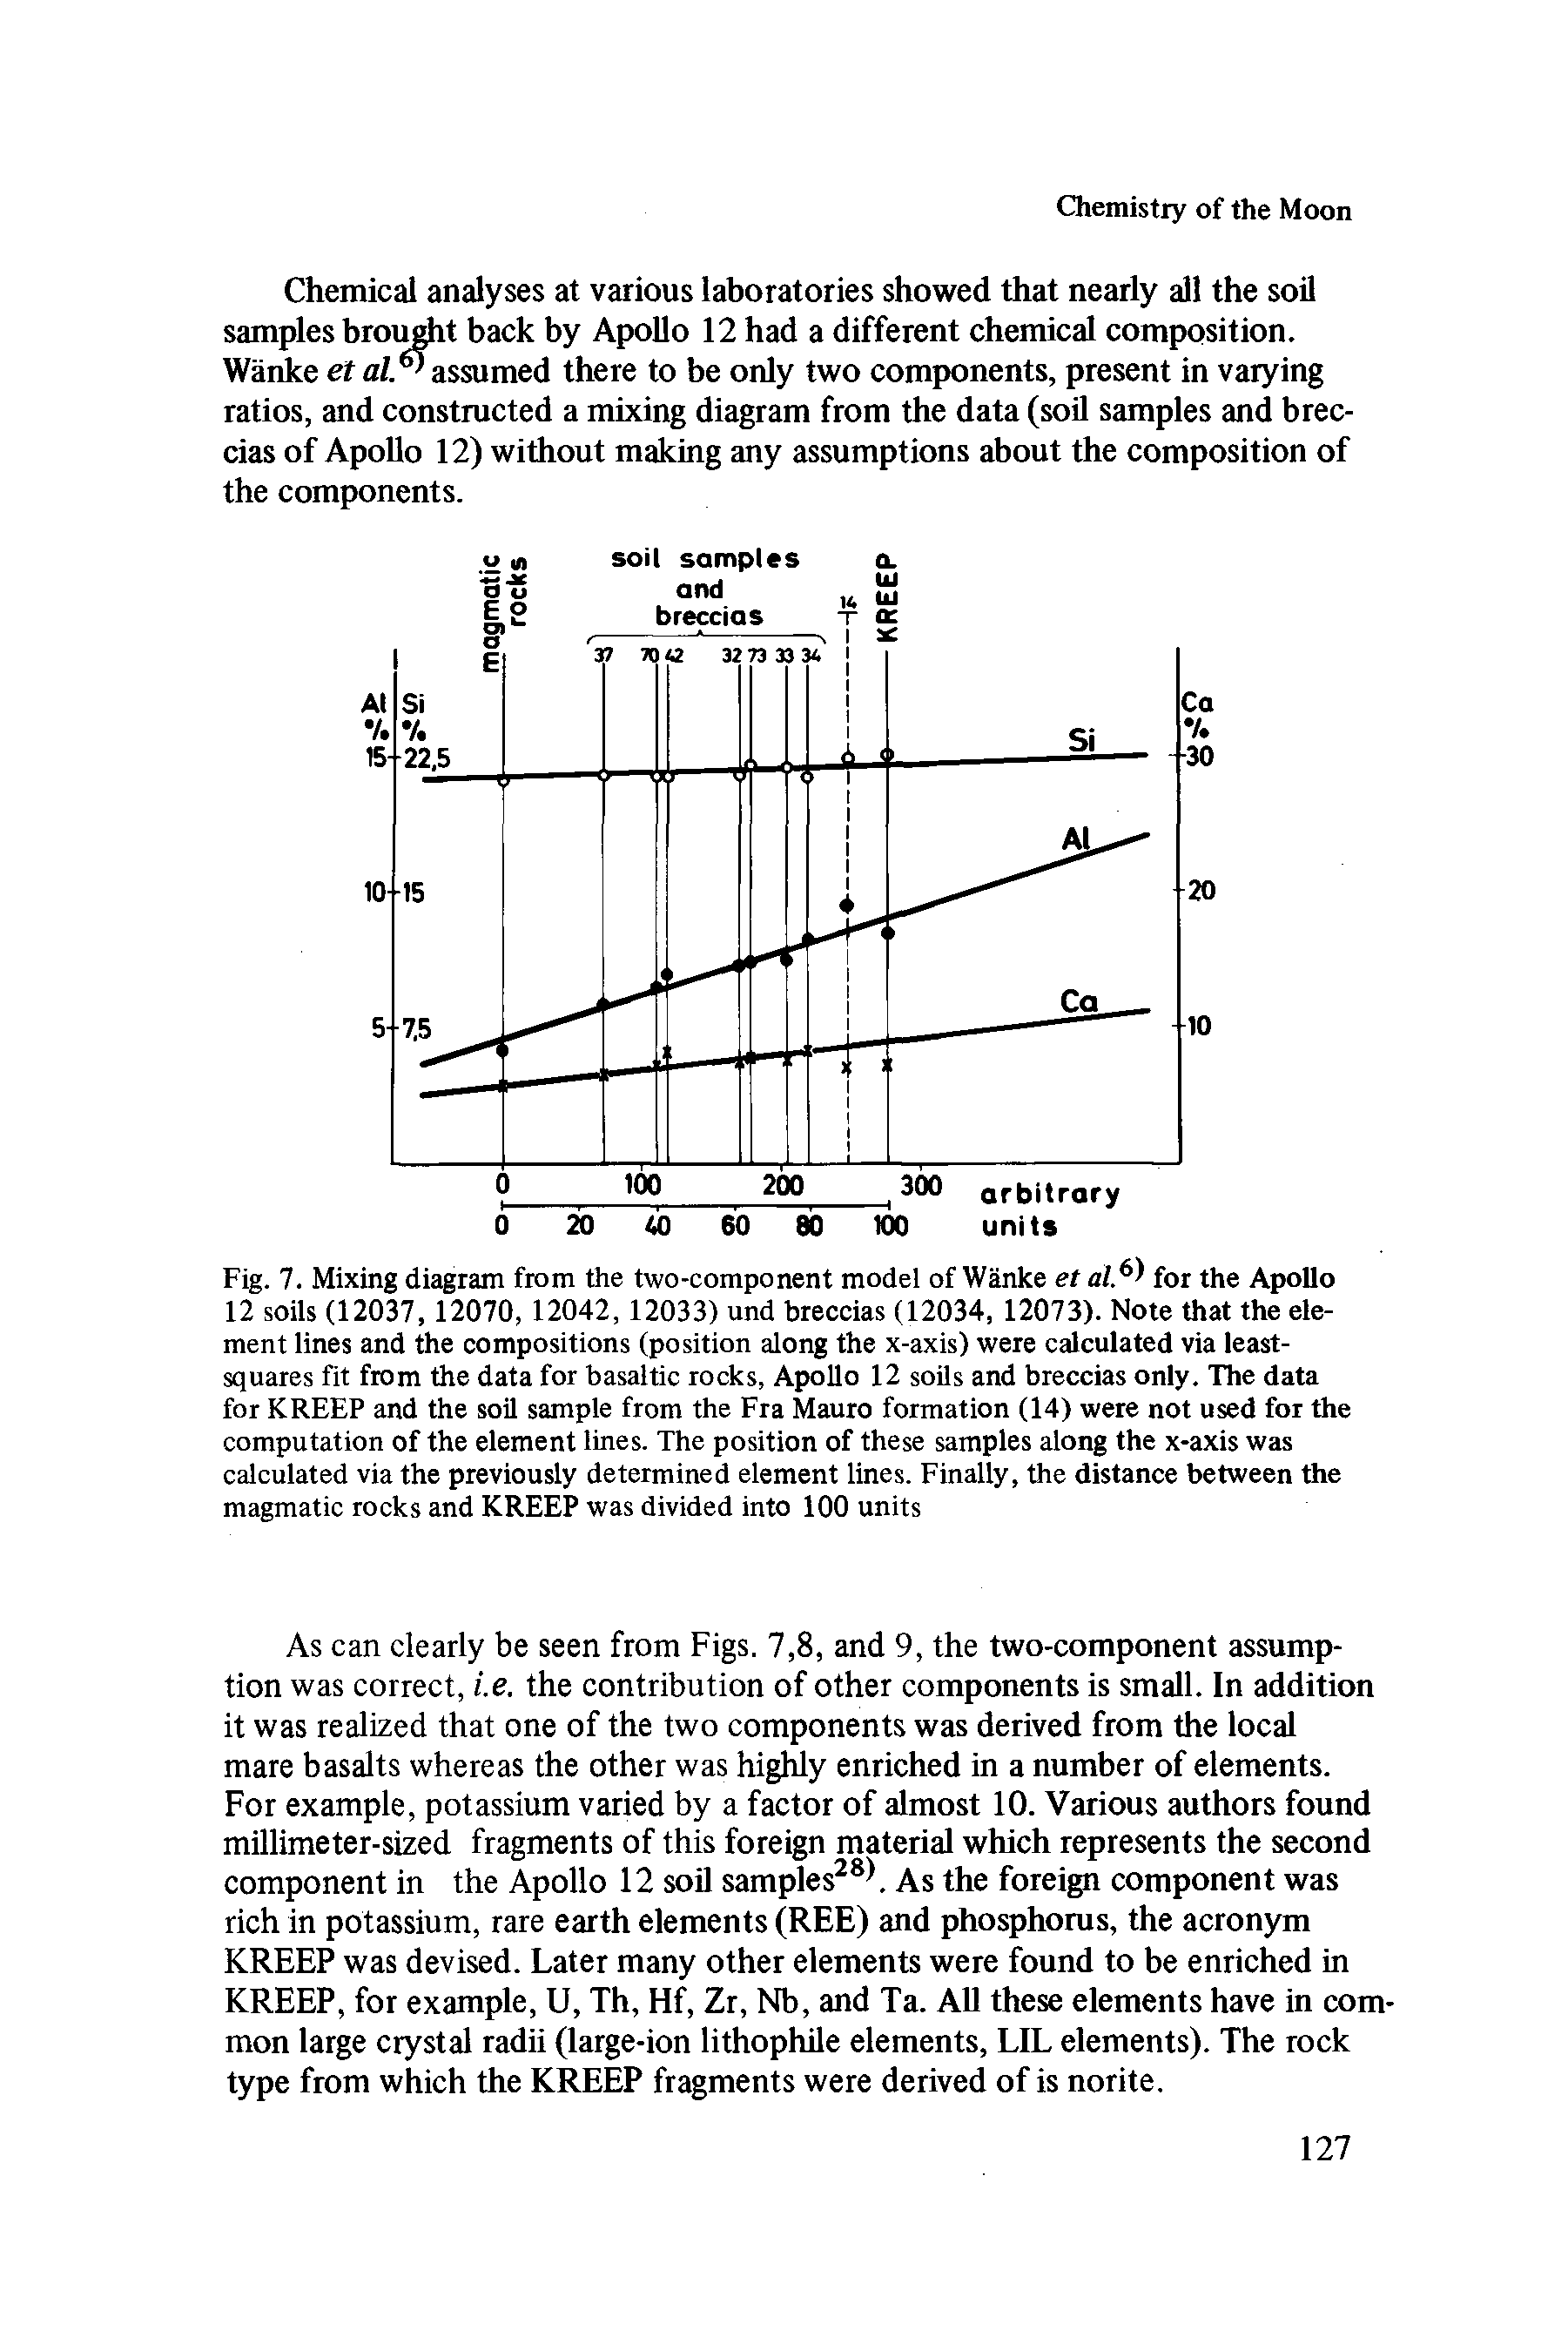 Fig. 7. Mixing diagram from the two-component model of Wanke et al,6 for the Apollo 12 soils (12037, 12070, 12042, 12033) und breccias (12034, 12073). Note that the element lines and the compositions (position along the x-axis) were calculated via least-squares fit from the data for basaltic rocks, Apollo 12 soils and breccias only. The data for KREEP and the soil sample from the Fra Mauro formation (14) were not used for the computation of the element lines. The position of these samples along the x-axis was calculated via the previously determined element lines. Finally, the distance between the magmatic rocks and KREEP was divided into 100 units...